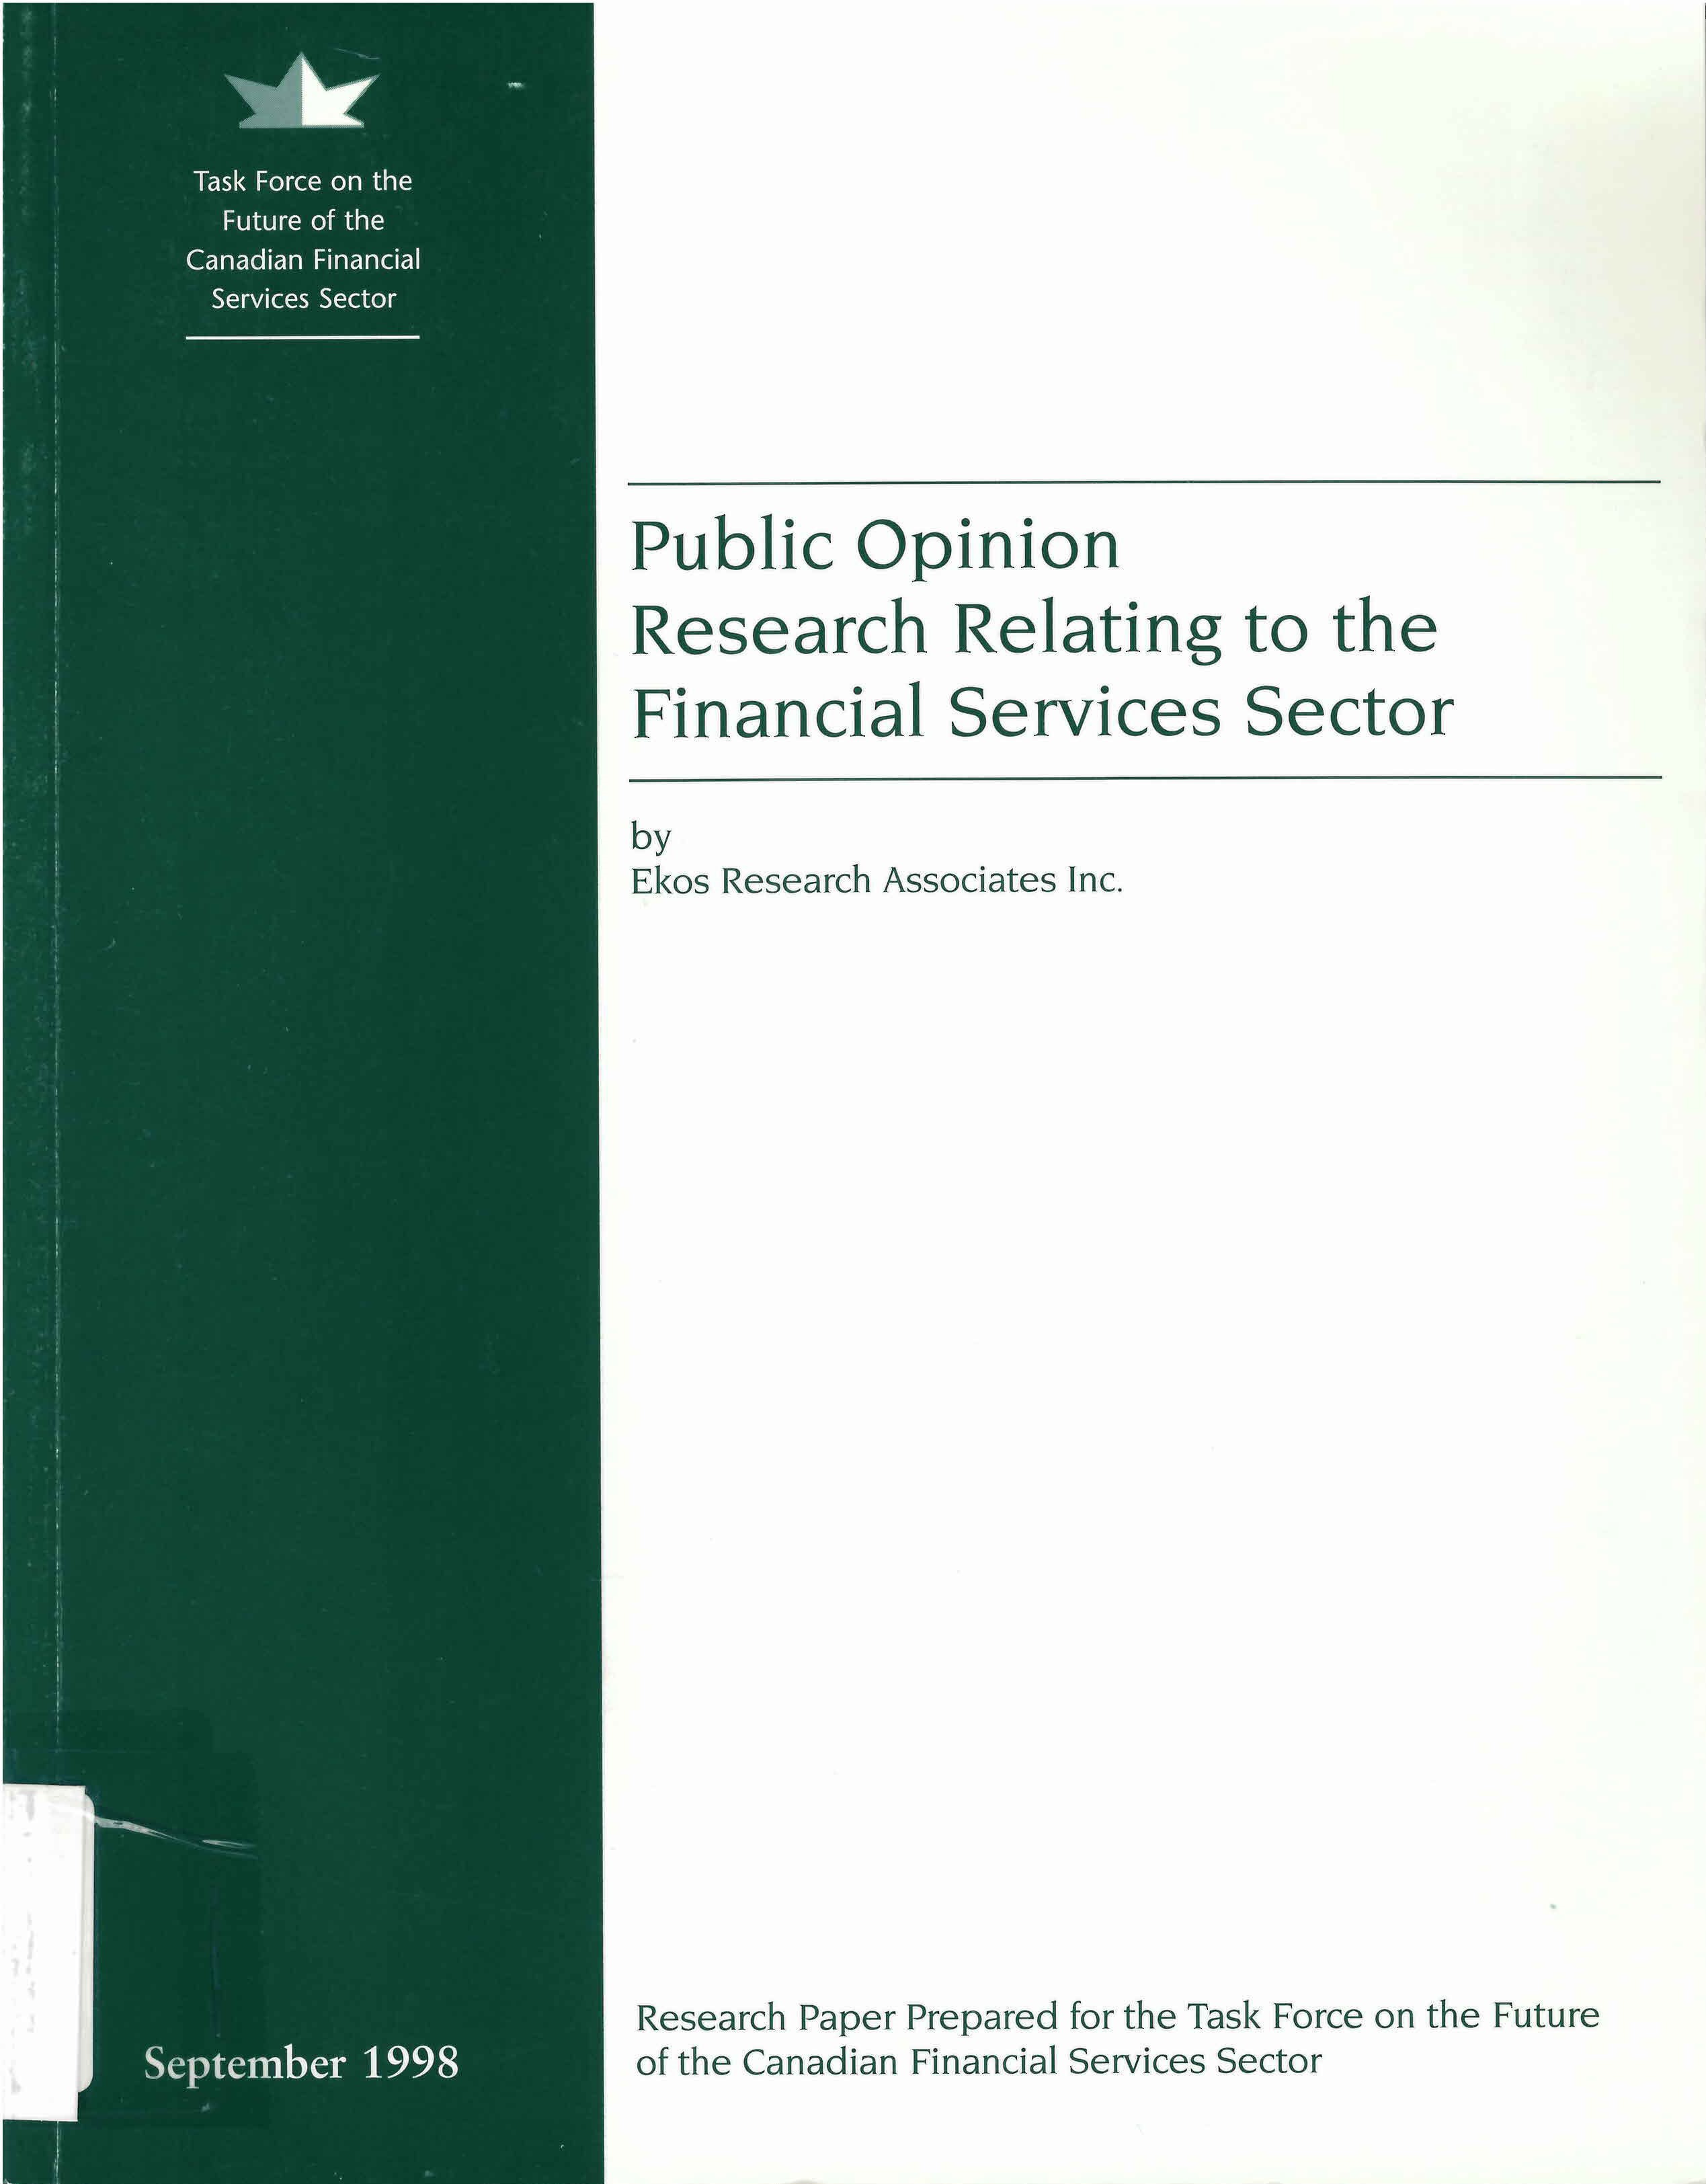 Public opinion research relating to the financial services sector